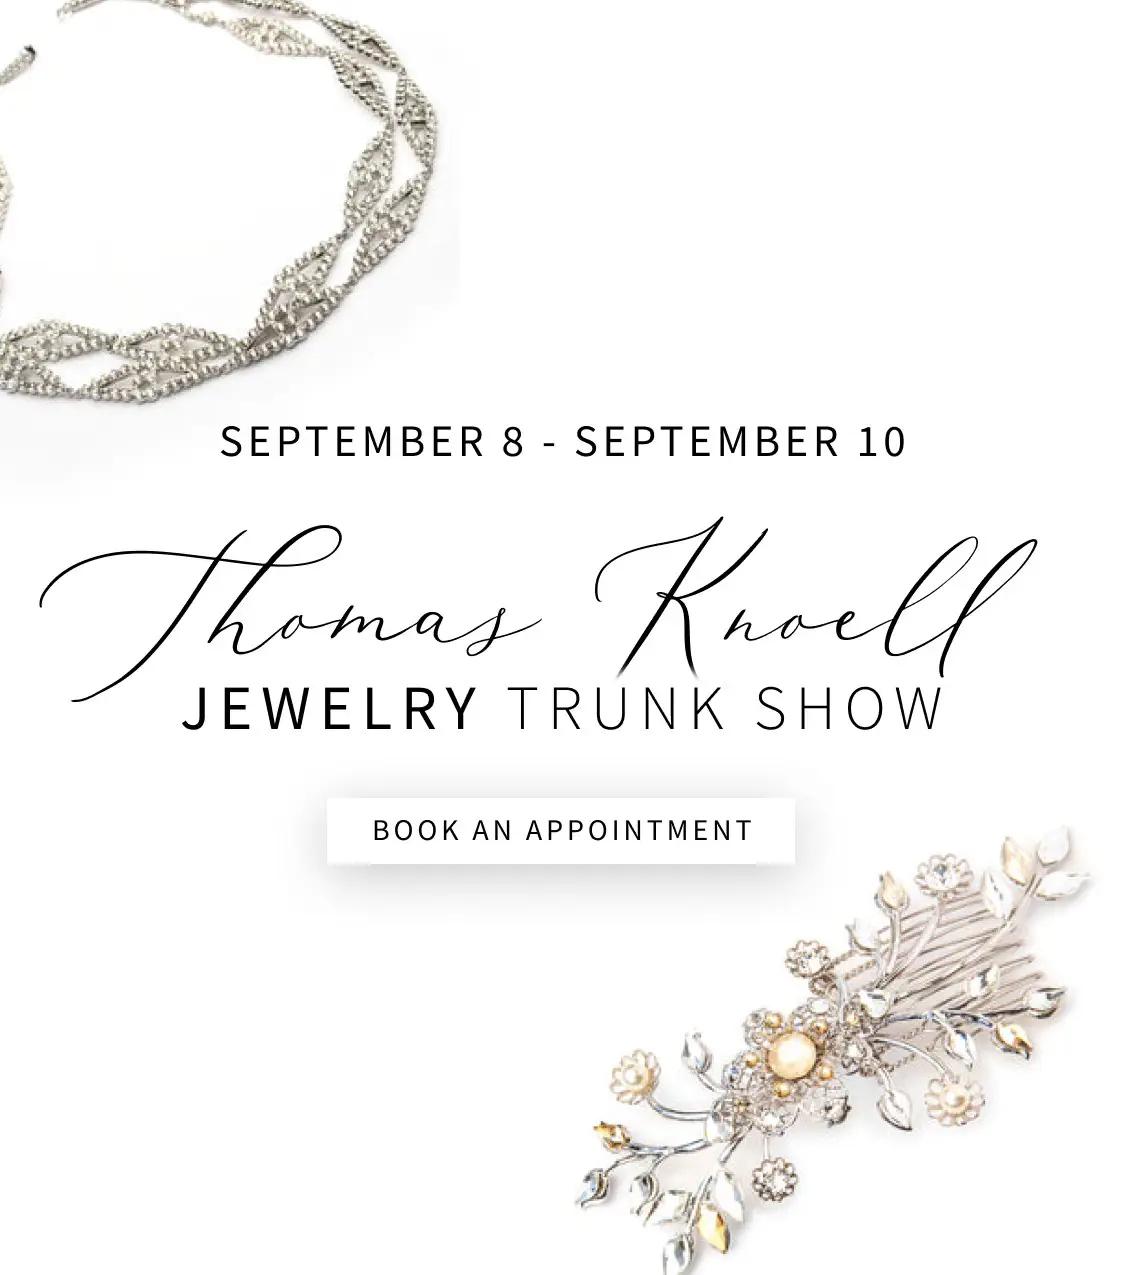 Thomas Knoell Jewelry Trunk Show September for mobile